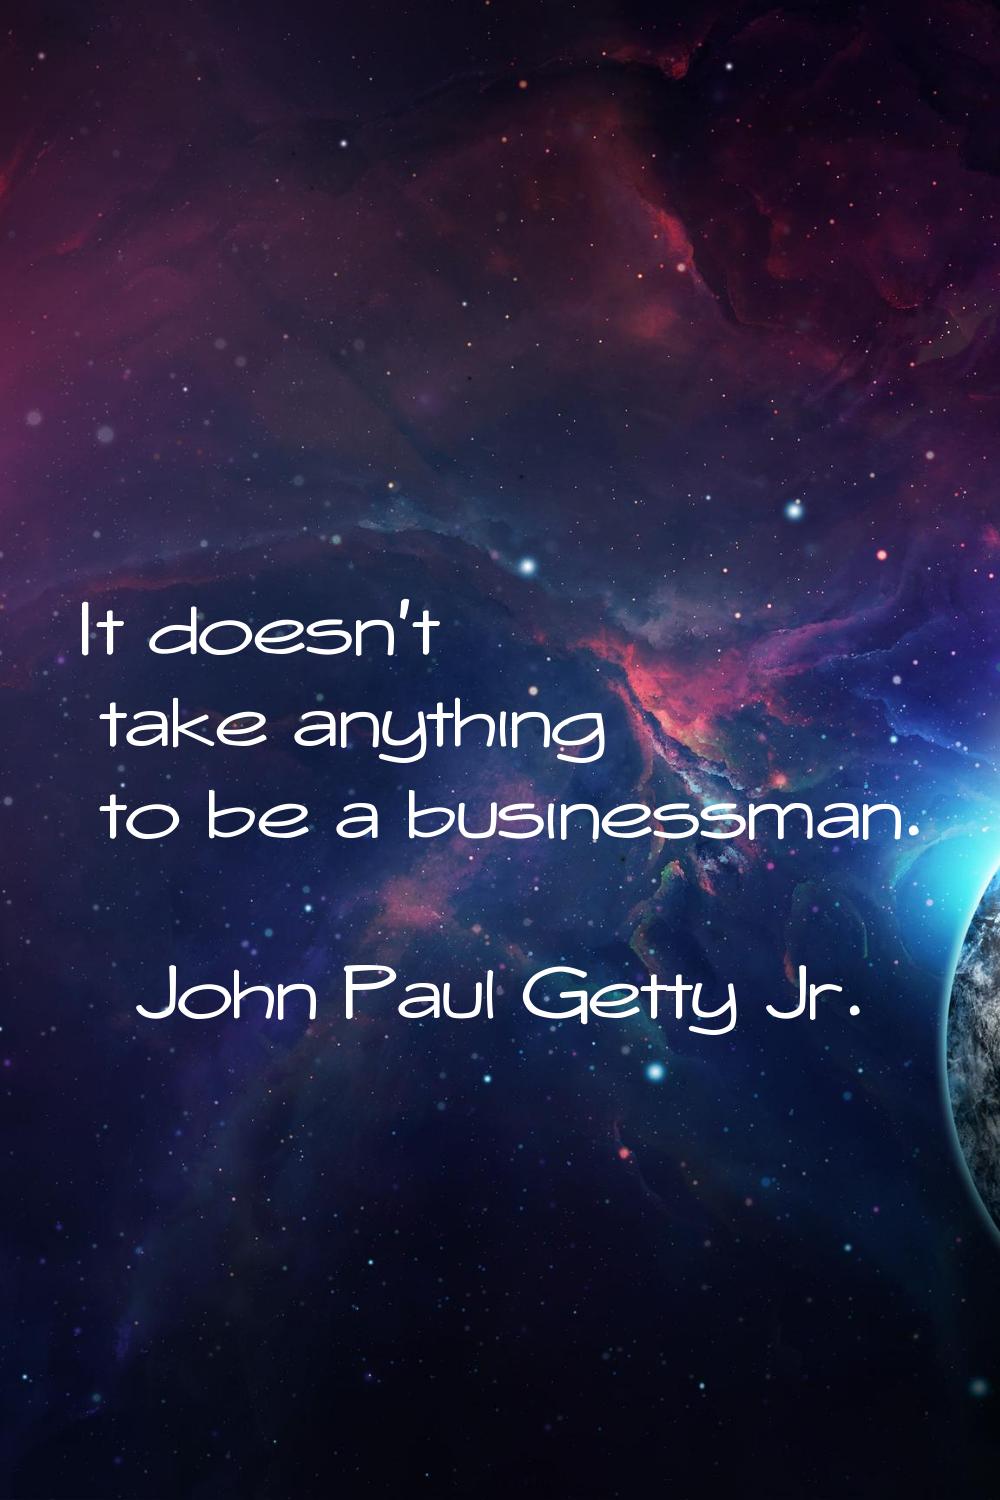 It doesn't take anything to be a businessman.